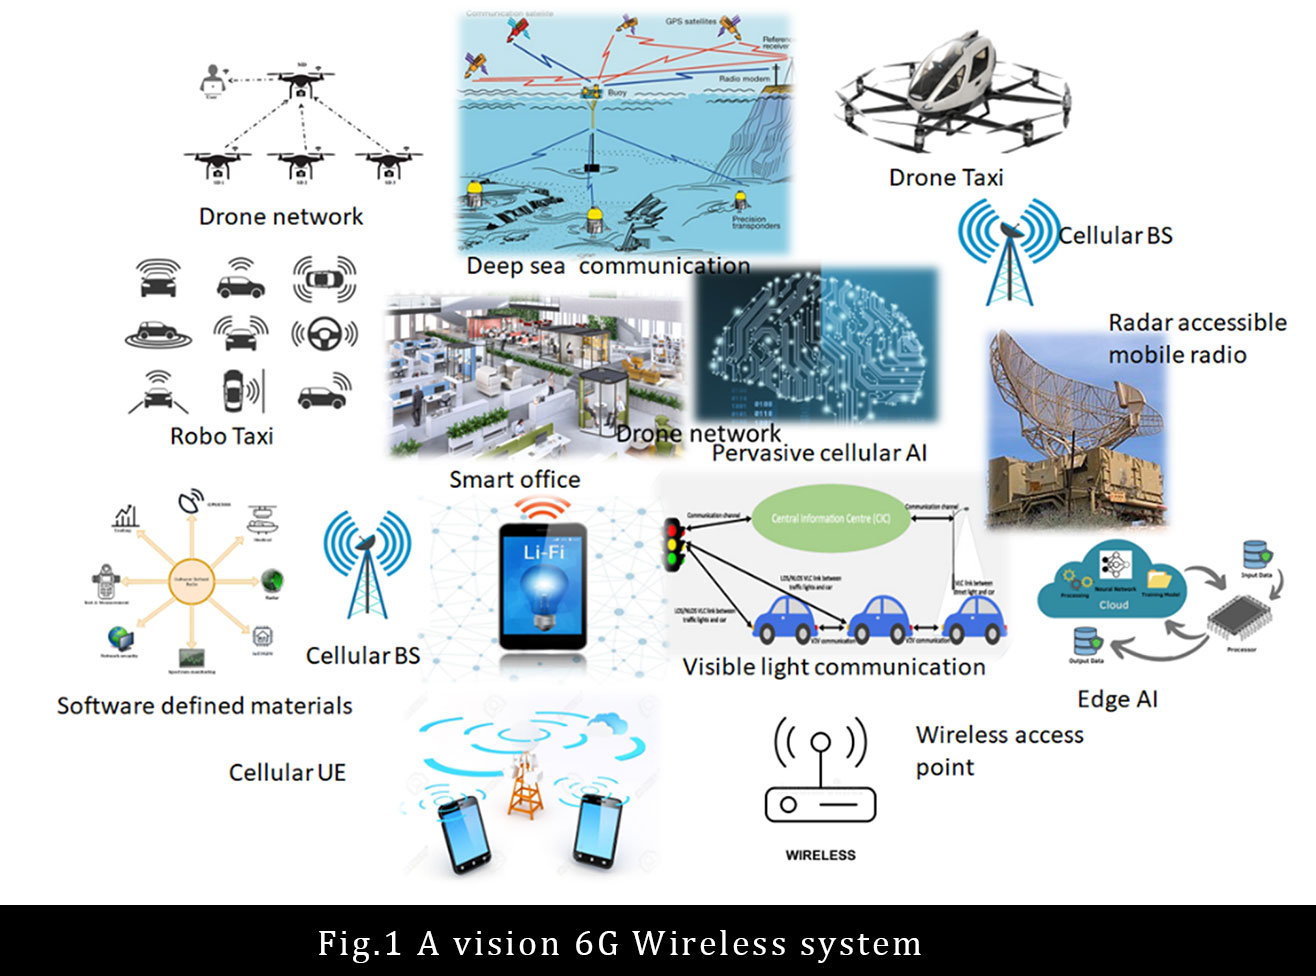 A vision 6G Wireless system